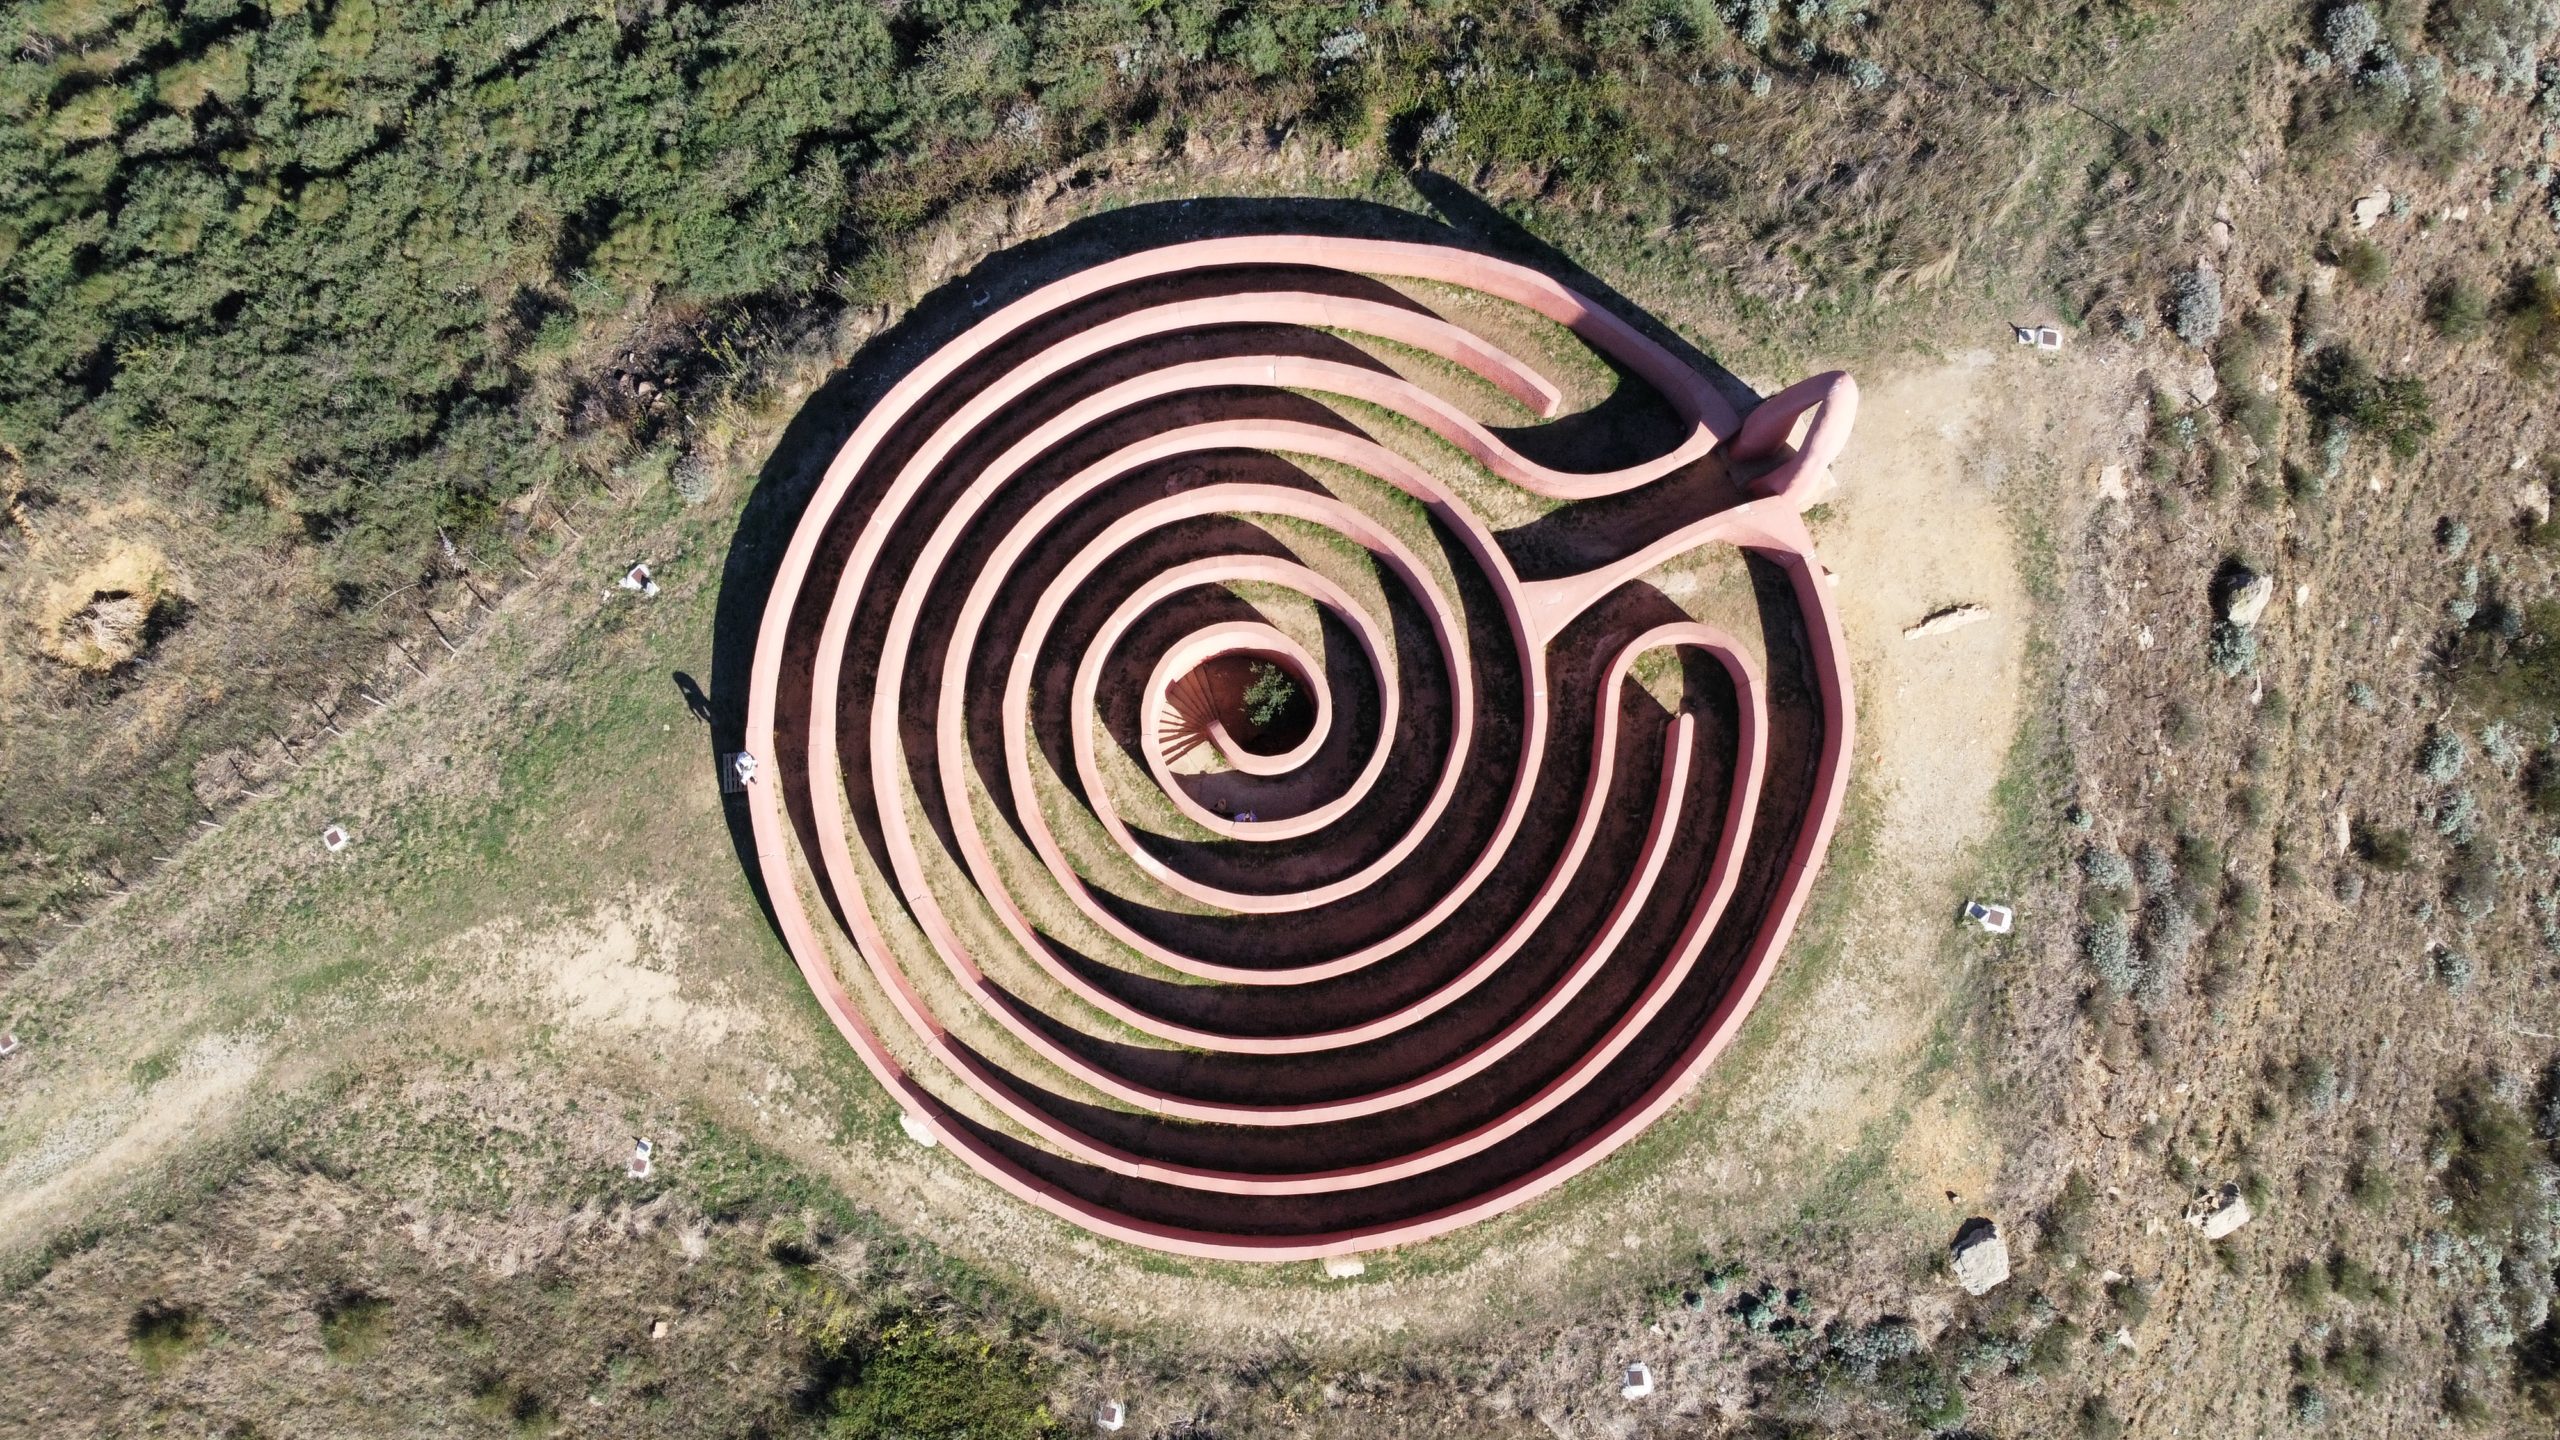 Ariadne's labyrinth in Sicily, how to get there